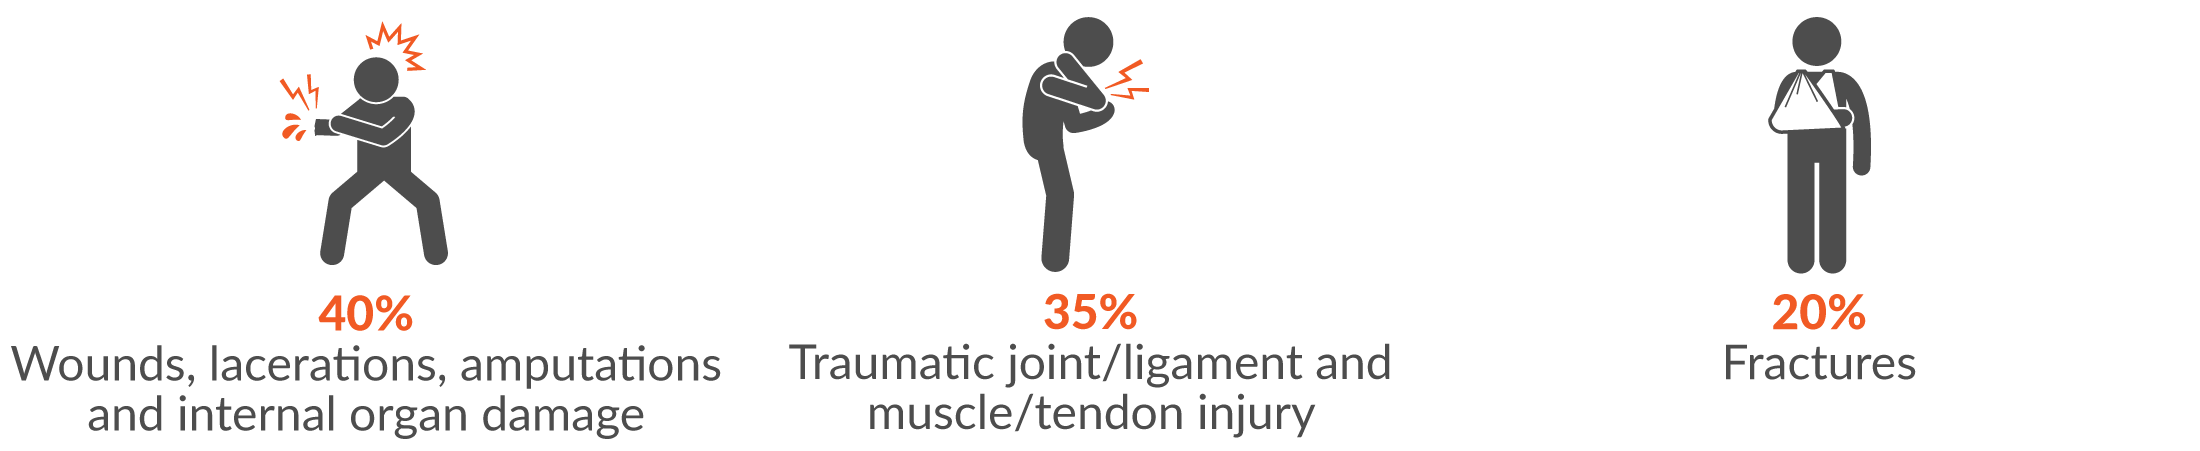 40% wounds, lacerations, amputations and internal organ damage; 35% traumatic joint/ligament and muscle/tendon injury; and 20% fractures.